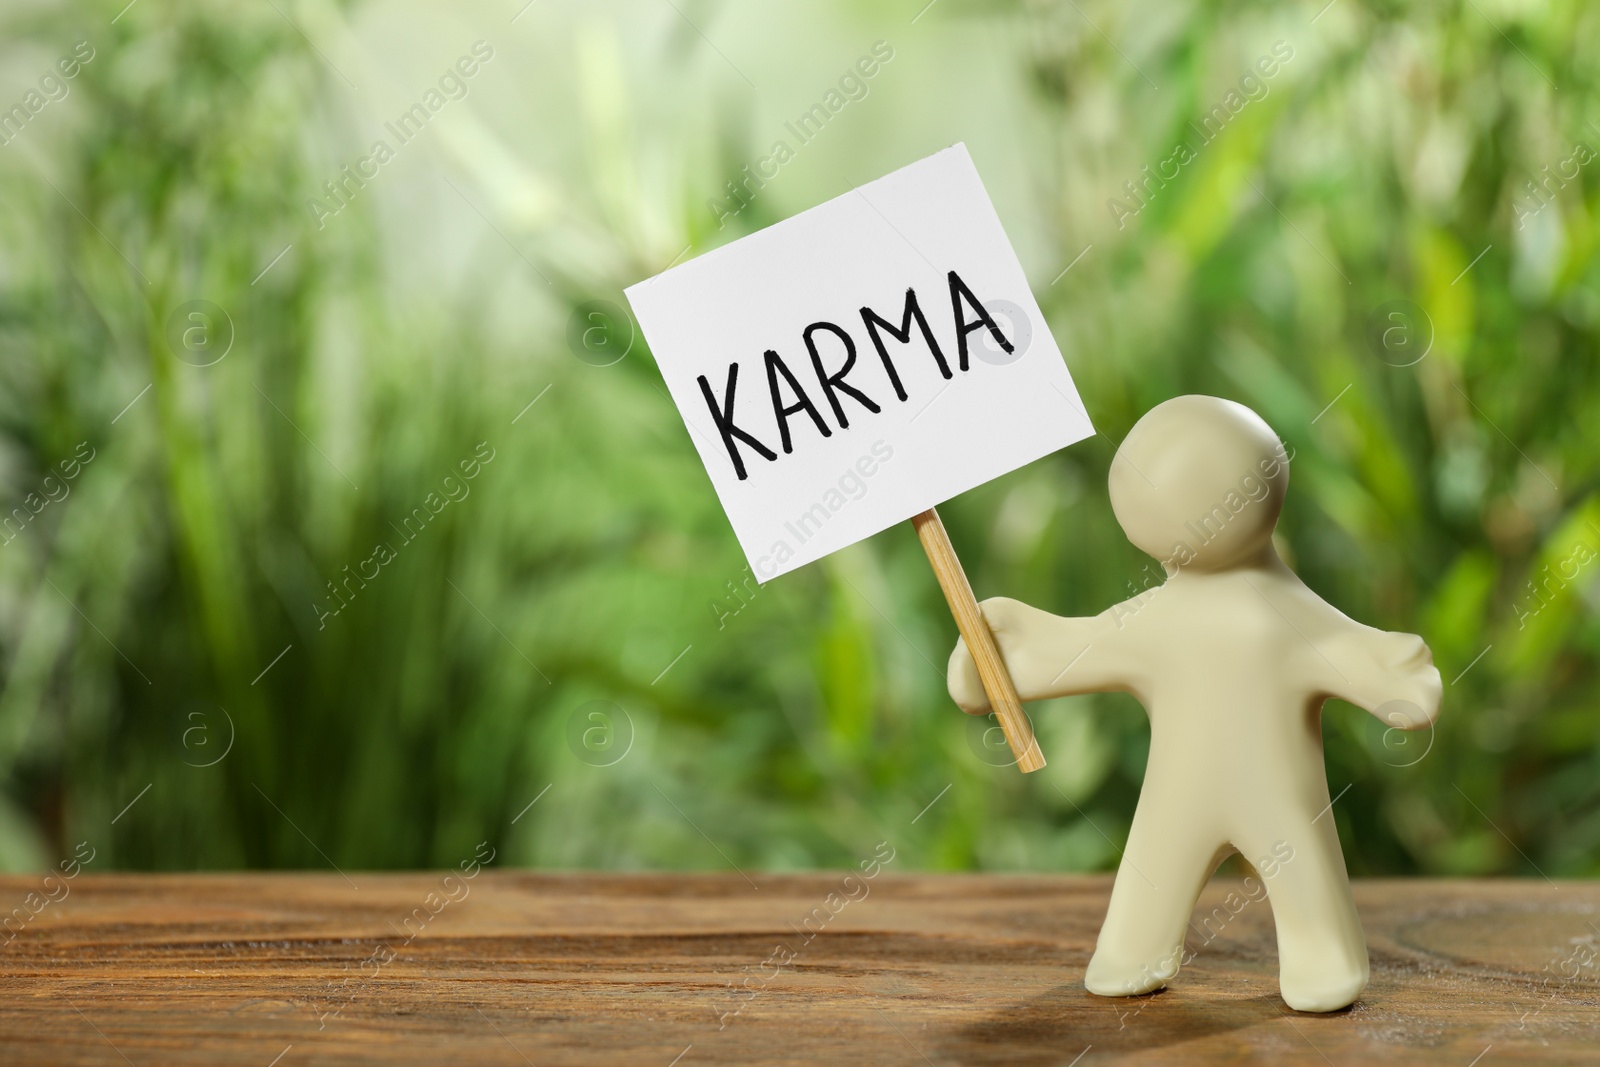 Photo of Human figure holding sign with word Karma on wooden table. Space for text